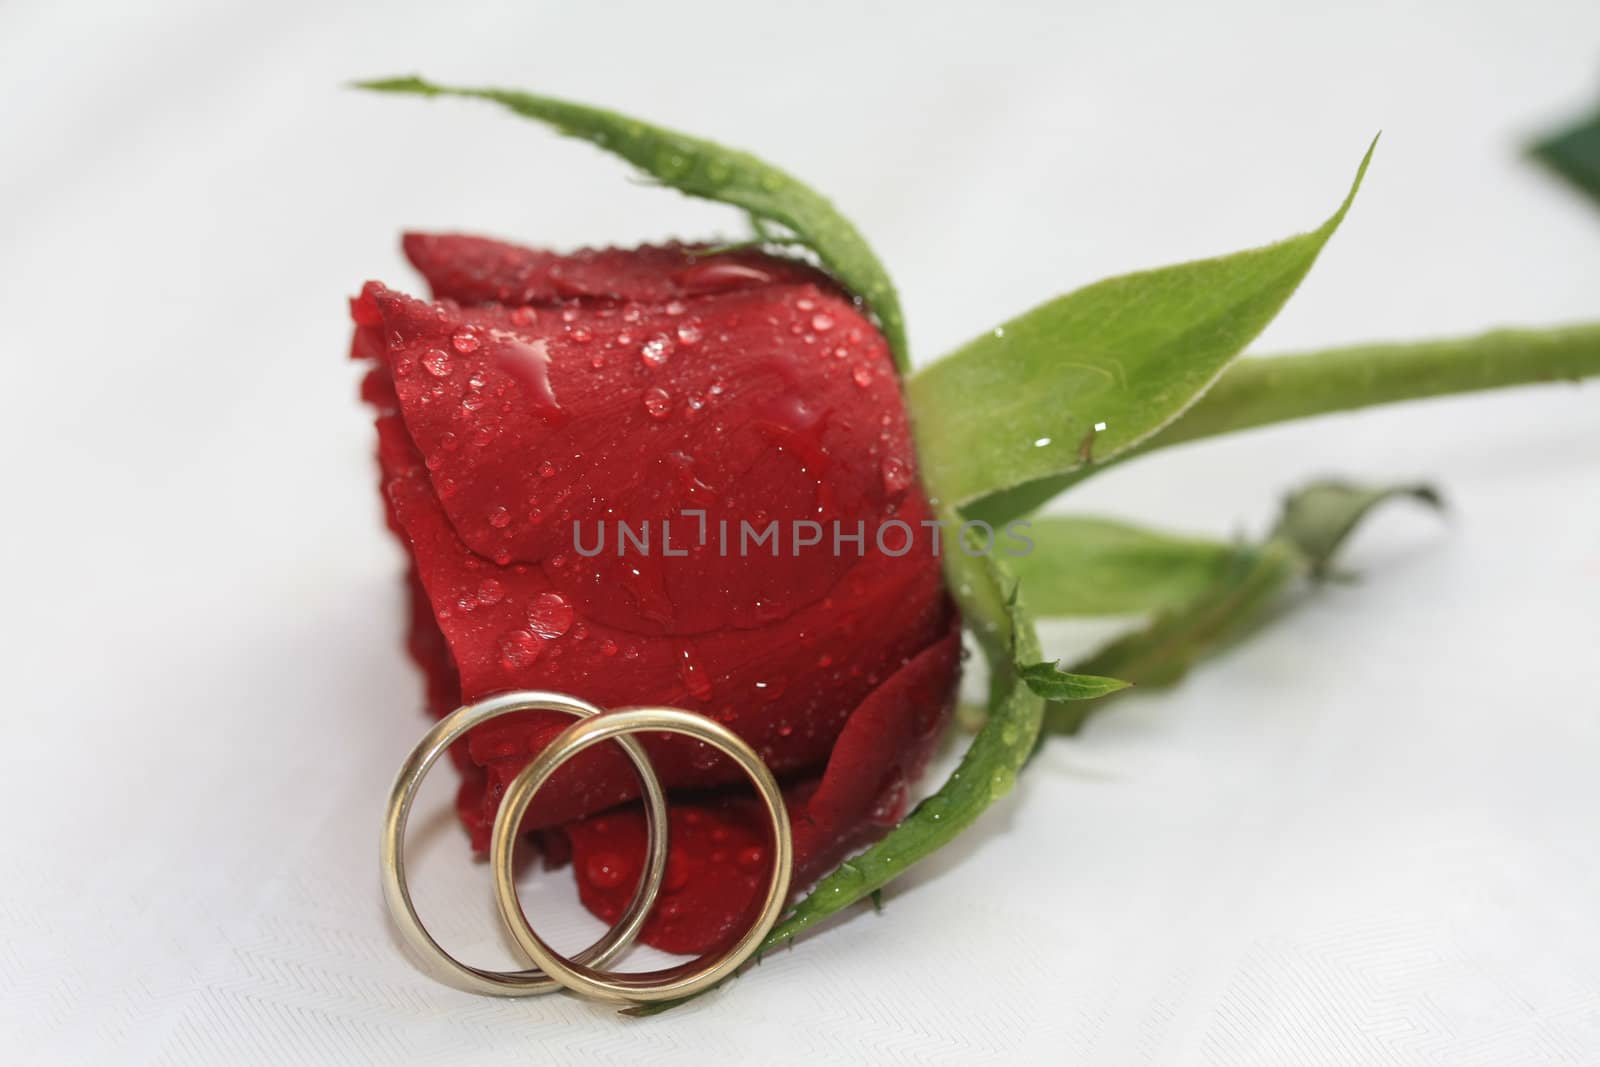 A pair of plain wedding bands and a red rose, covered with raindrops